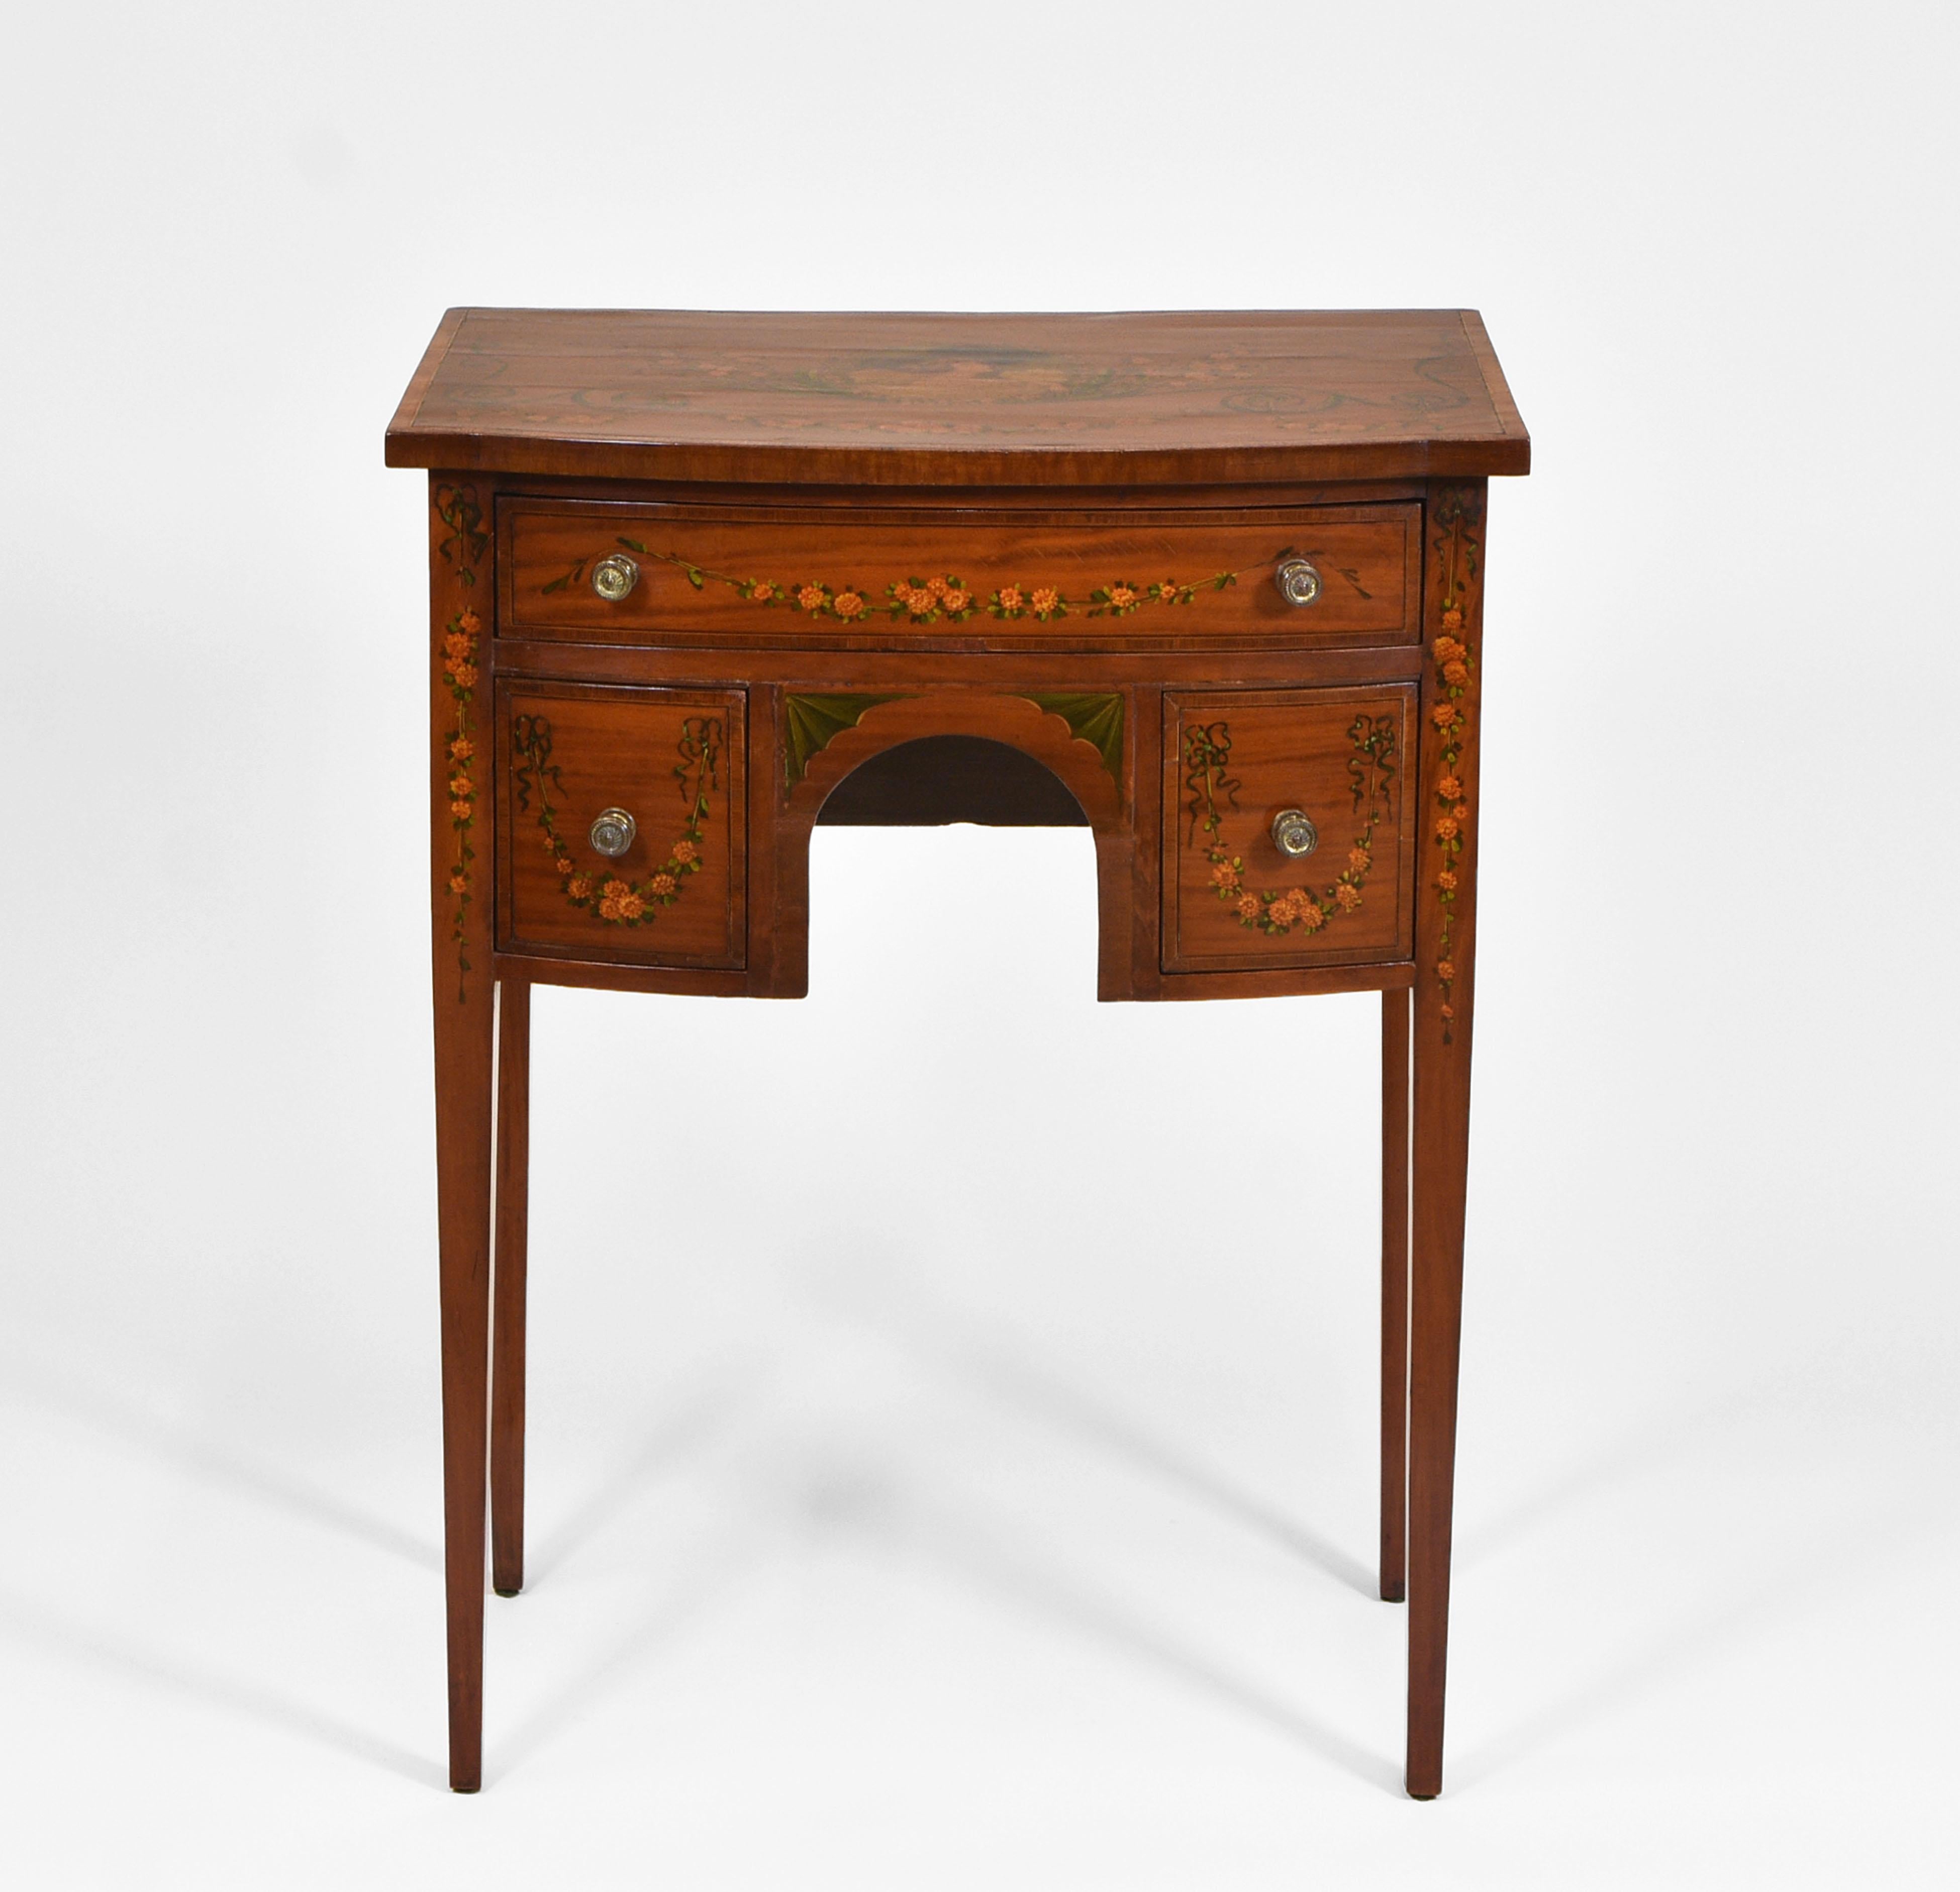 A lovely Edwardian Sheraton Revival painted satinwood side table. Circa 1900.

The table is of small proportions, veneered in satinwood with hand-painted classical decoration, including floral garlands, floral bouquets to the sides and a central